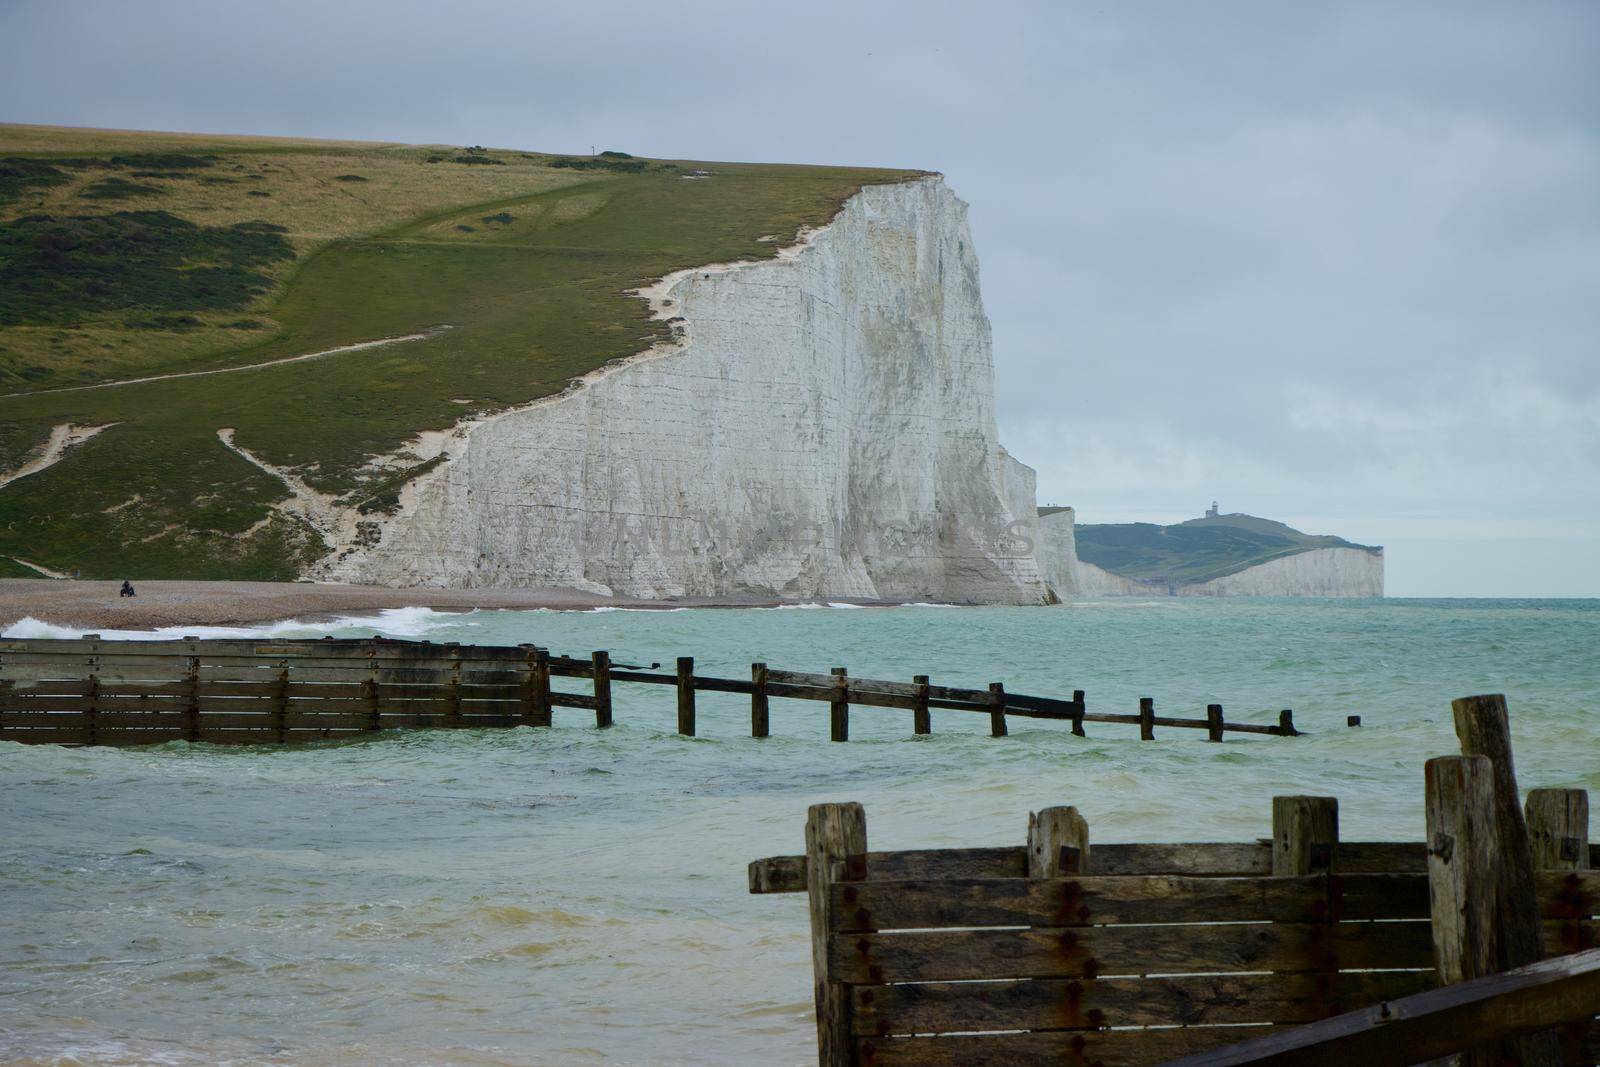 White chalk cliffs, sea and wooden groynes, Seven Sisters, Eastbourne by StefanMal